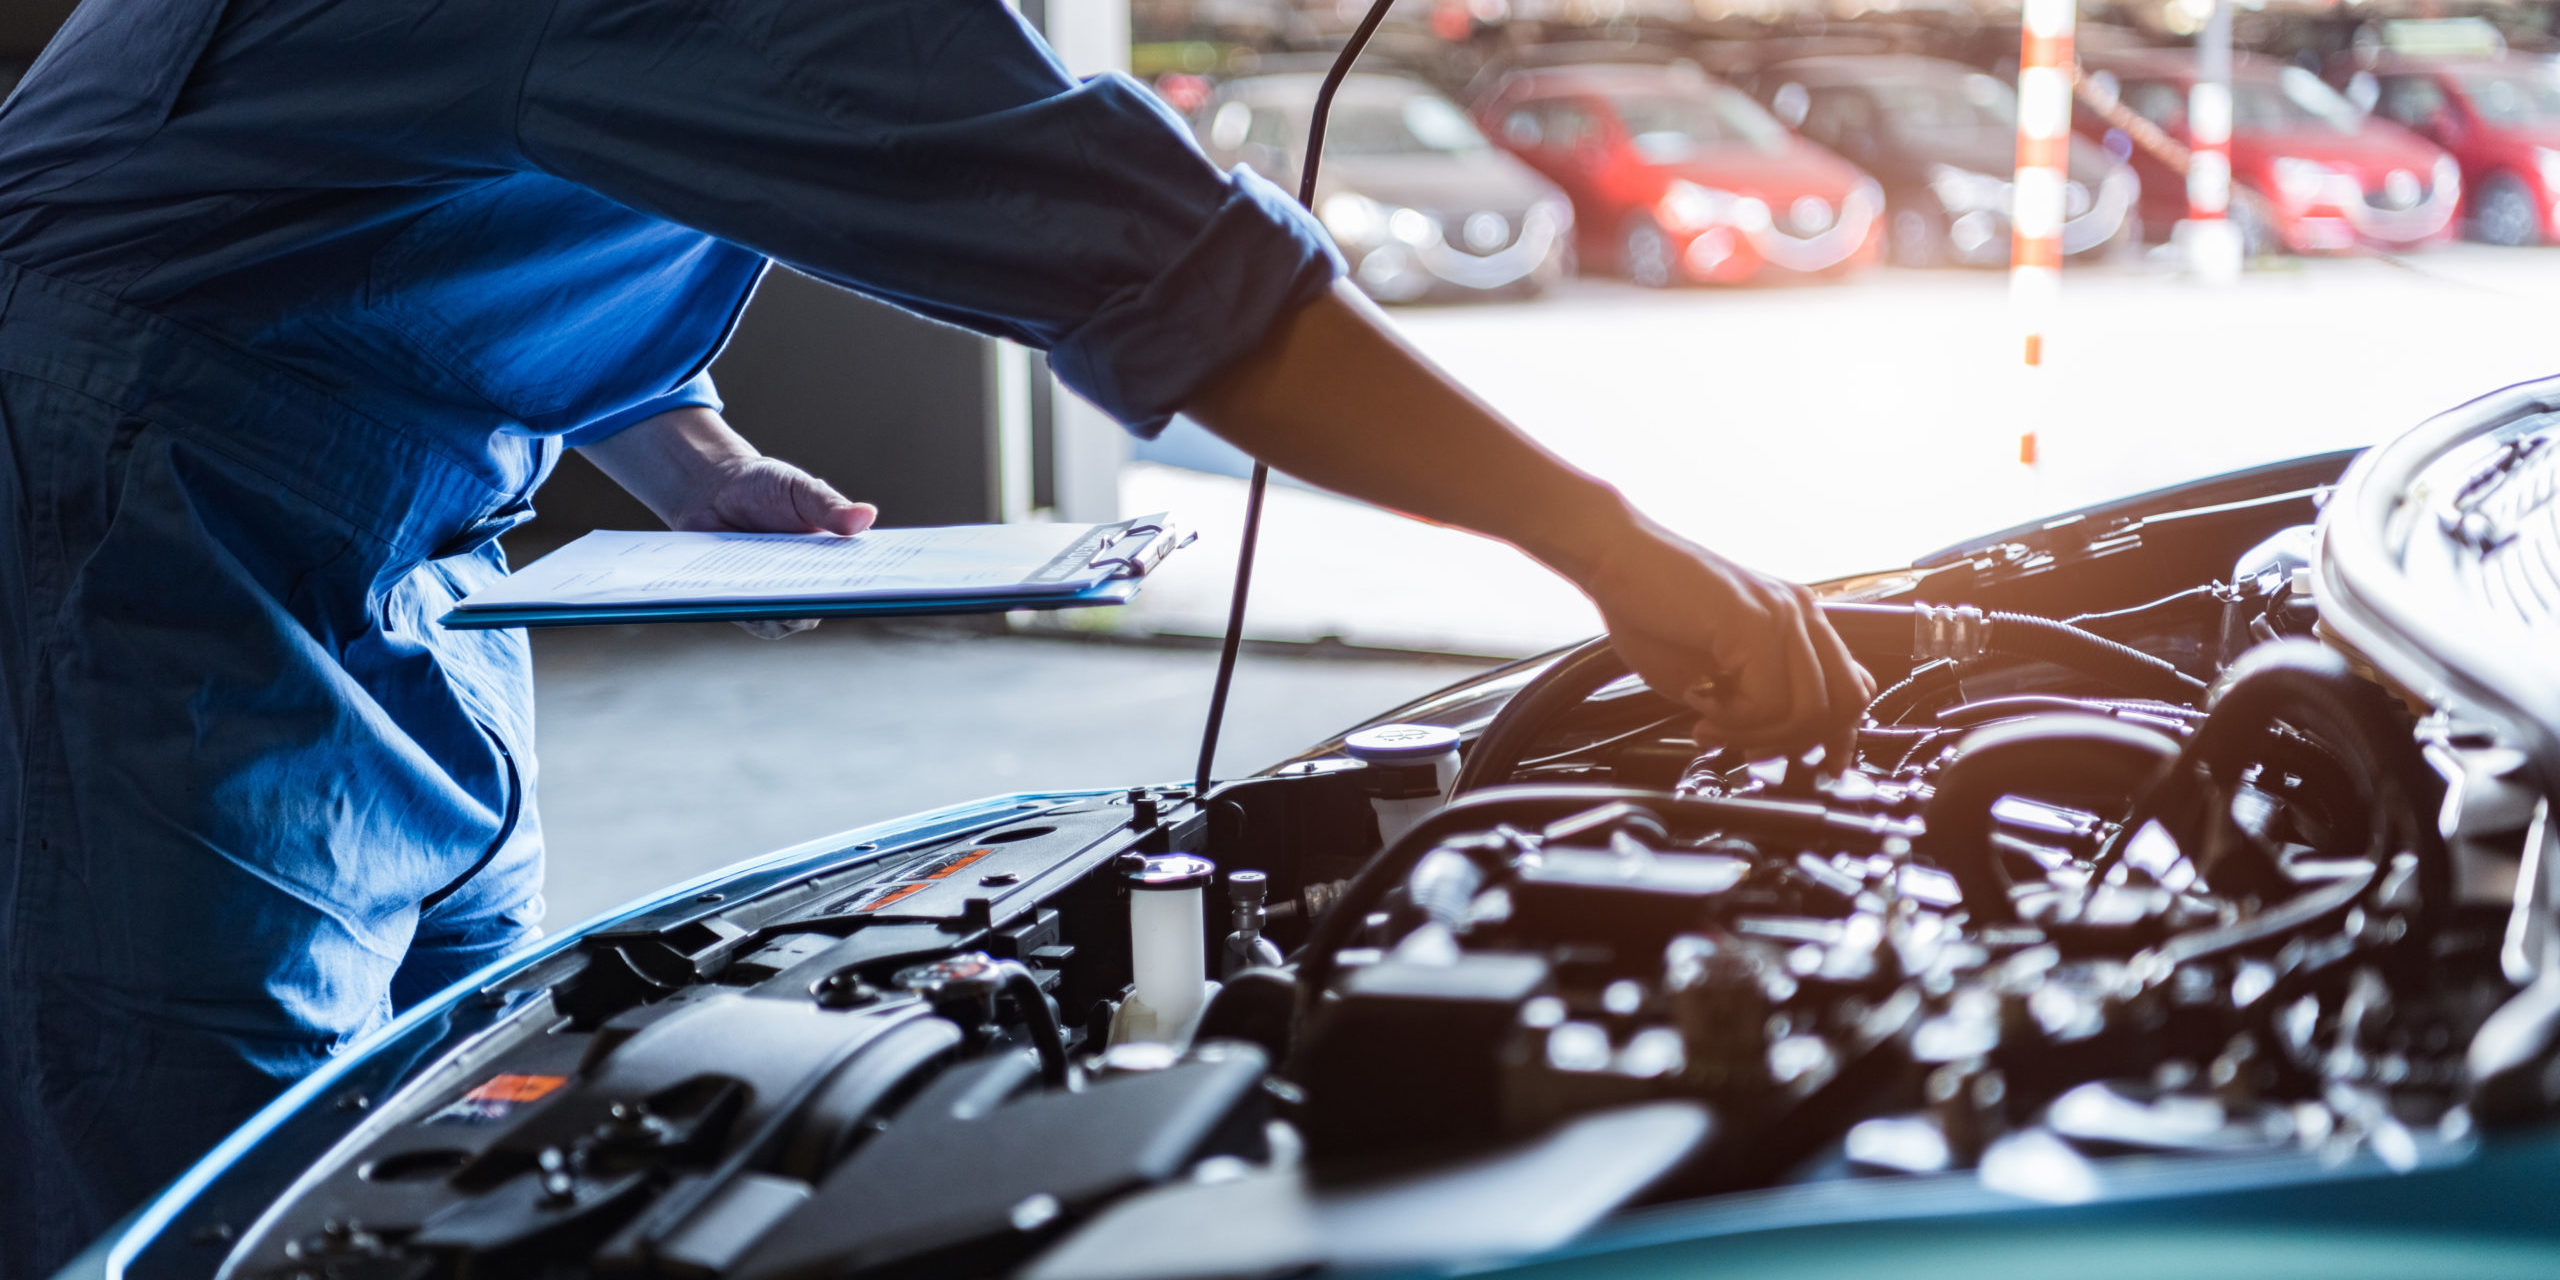 Car mechanic holding clipboard and checking to maintenance vehicle by customer claim order in auto repair shop garage. Engine repair service. People occupation and business job. Automobile technician